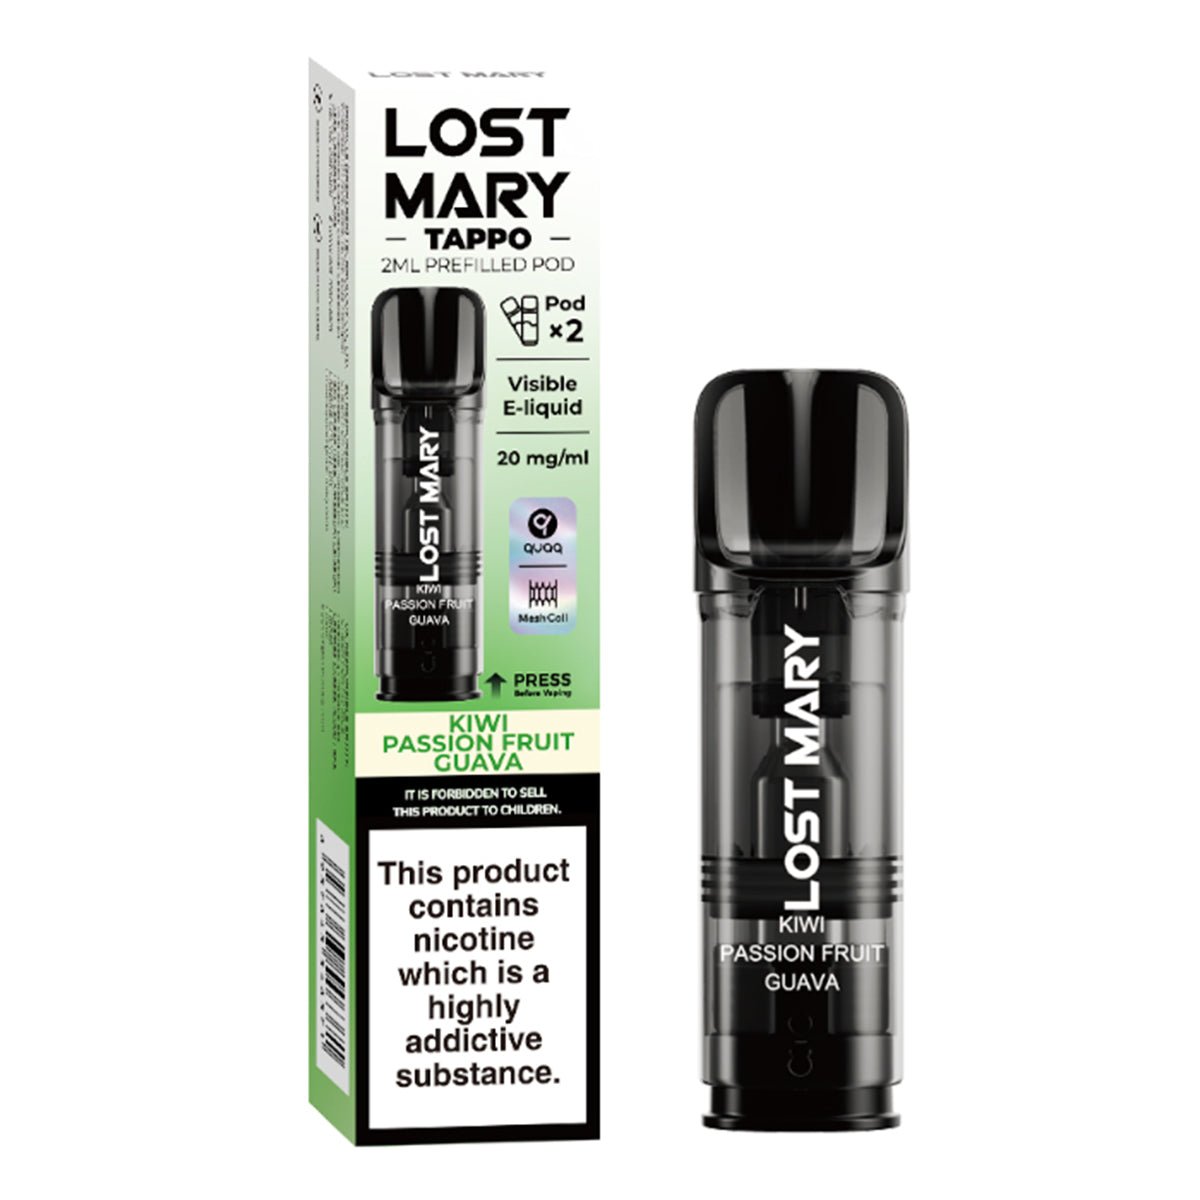 Kiwi Passionfruit Guava Tappo Pre-filled Pod by Lost Mary - Prime Vapes UK